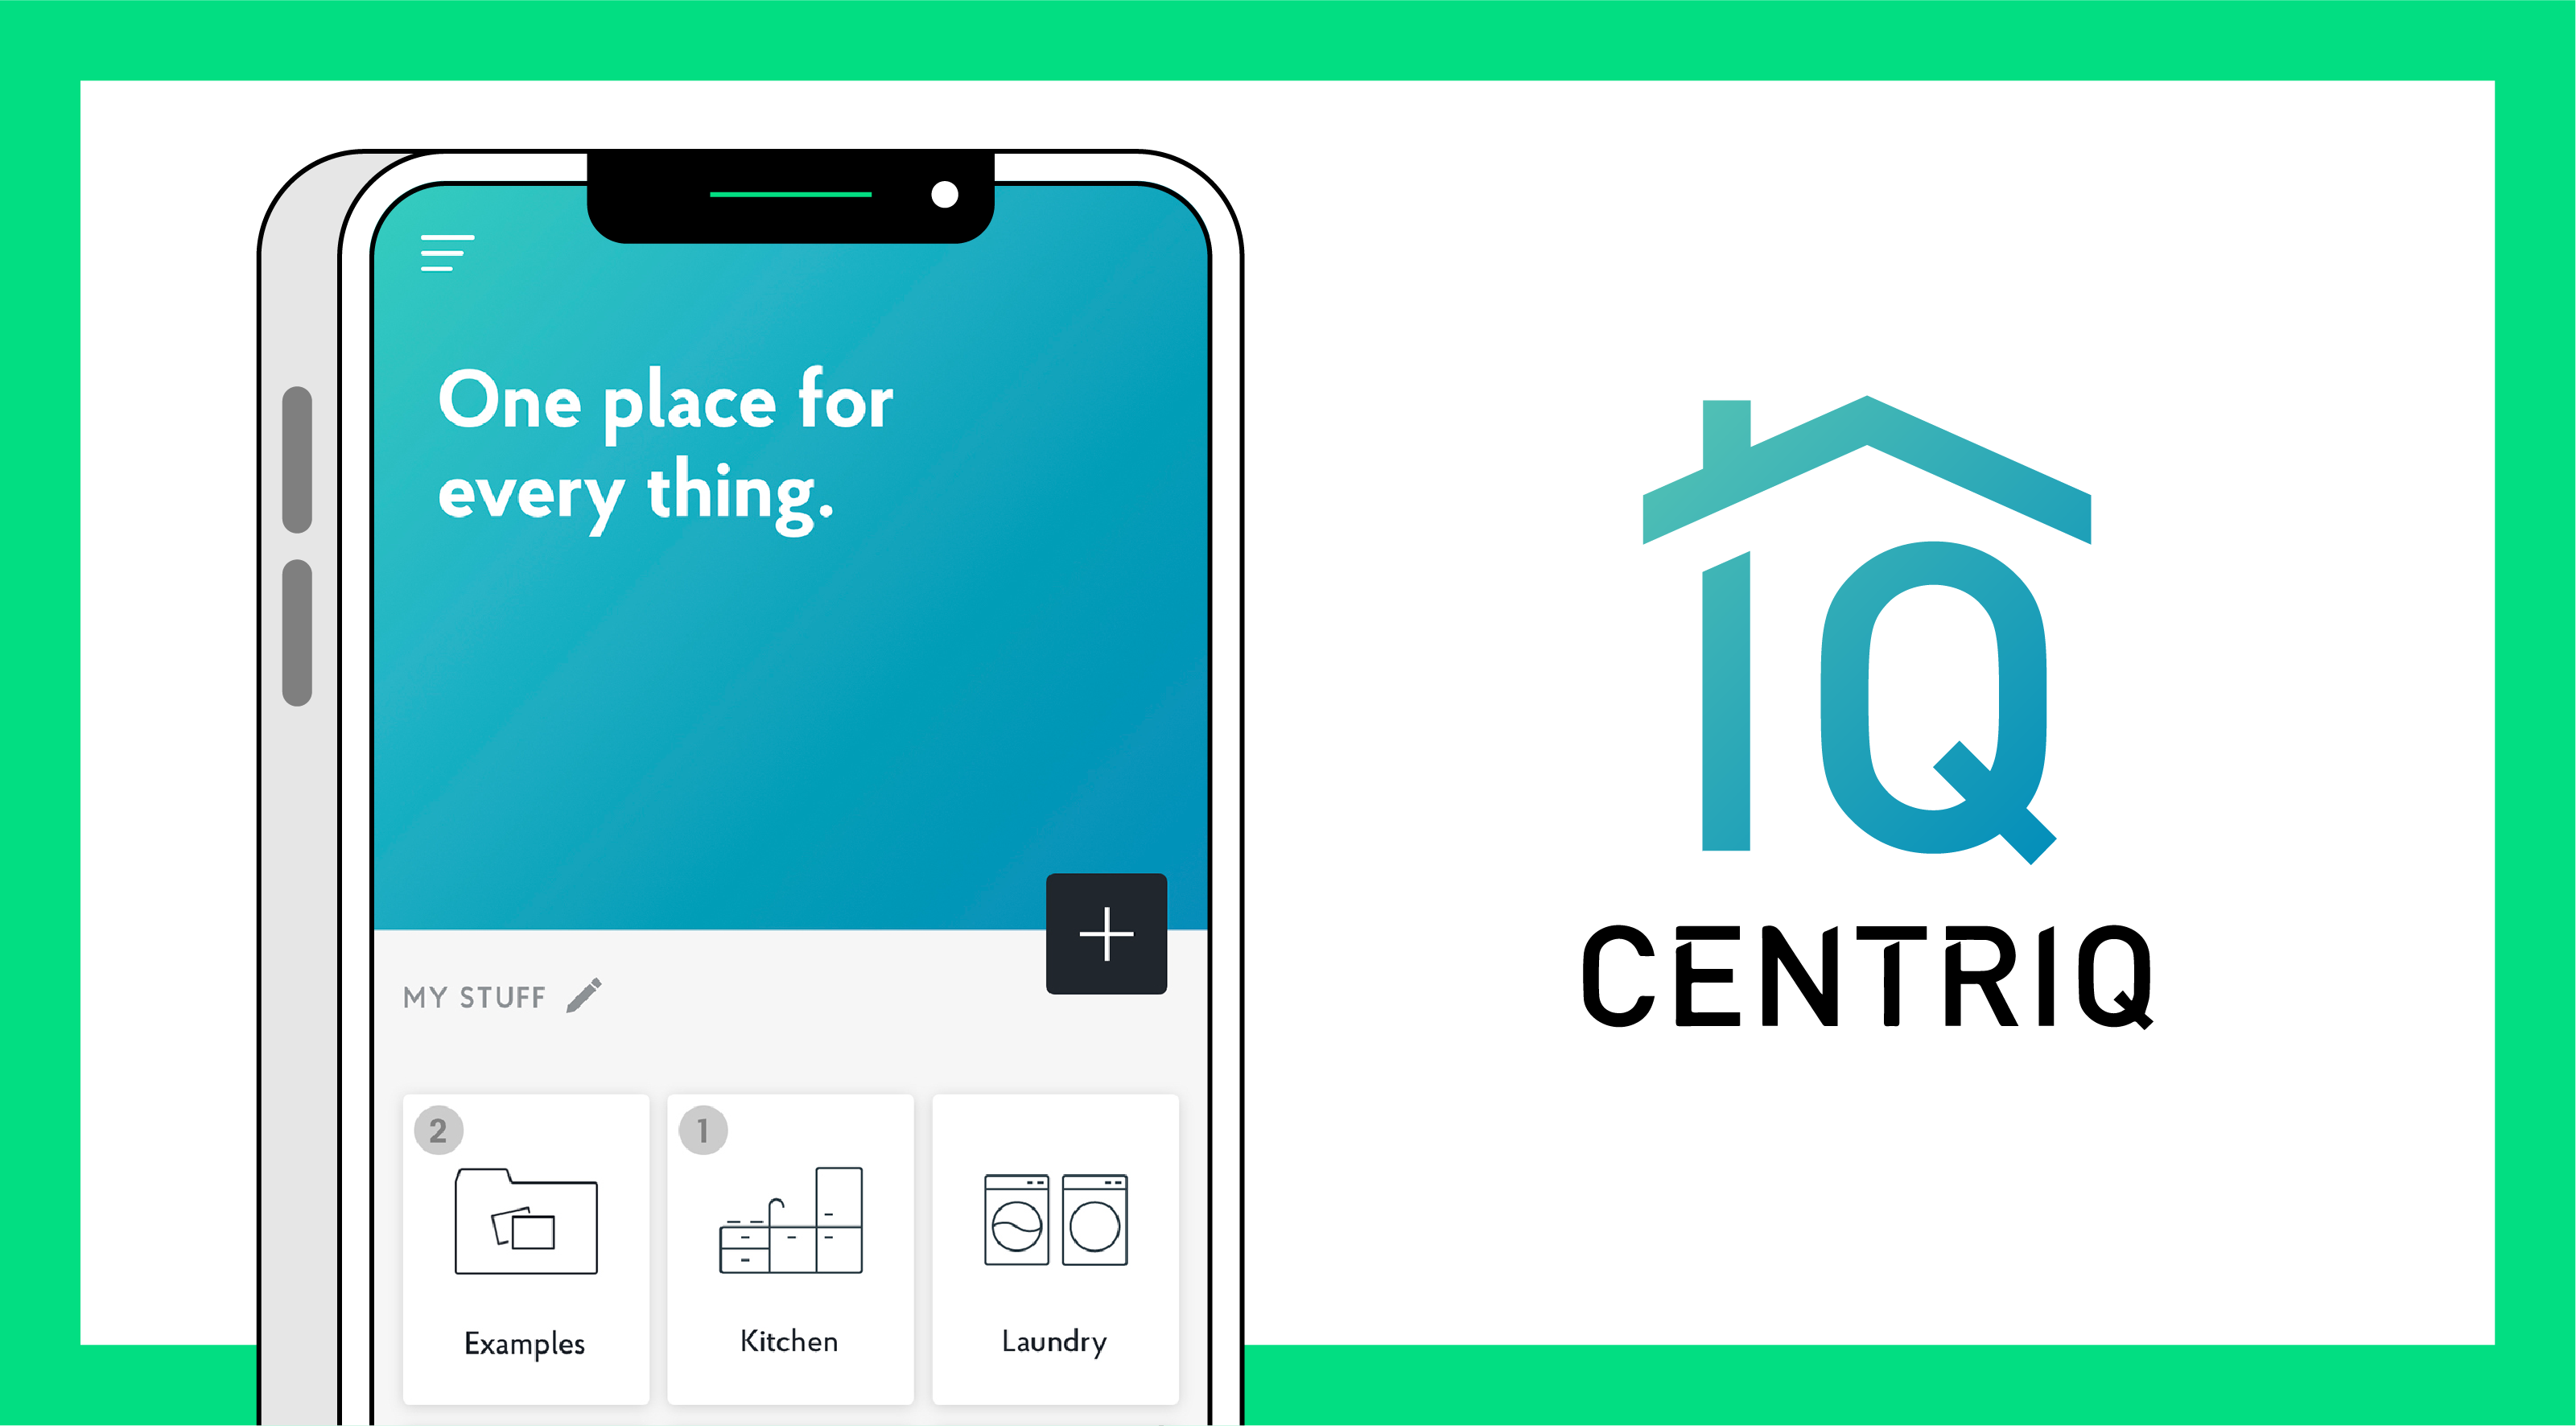 Image of a phone with the centriq app on the screen surrounded by a green border